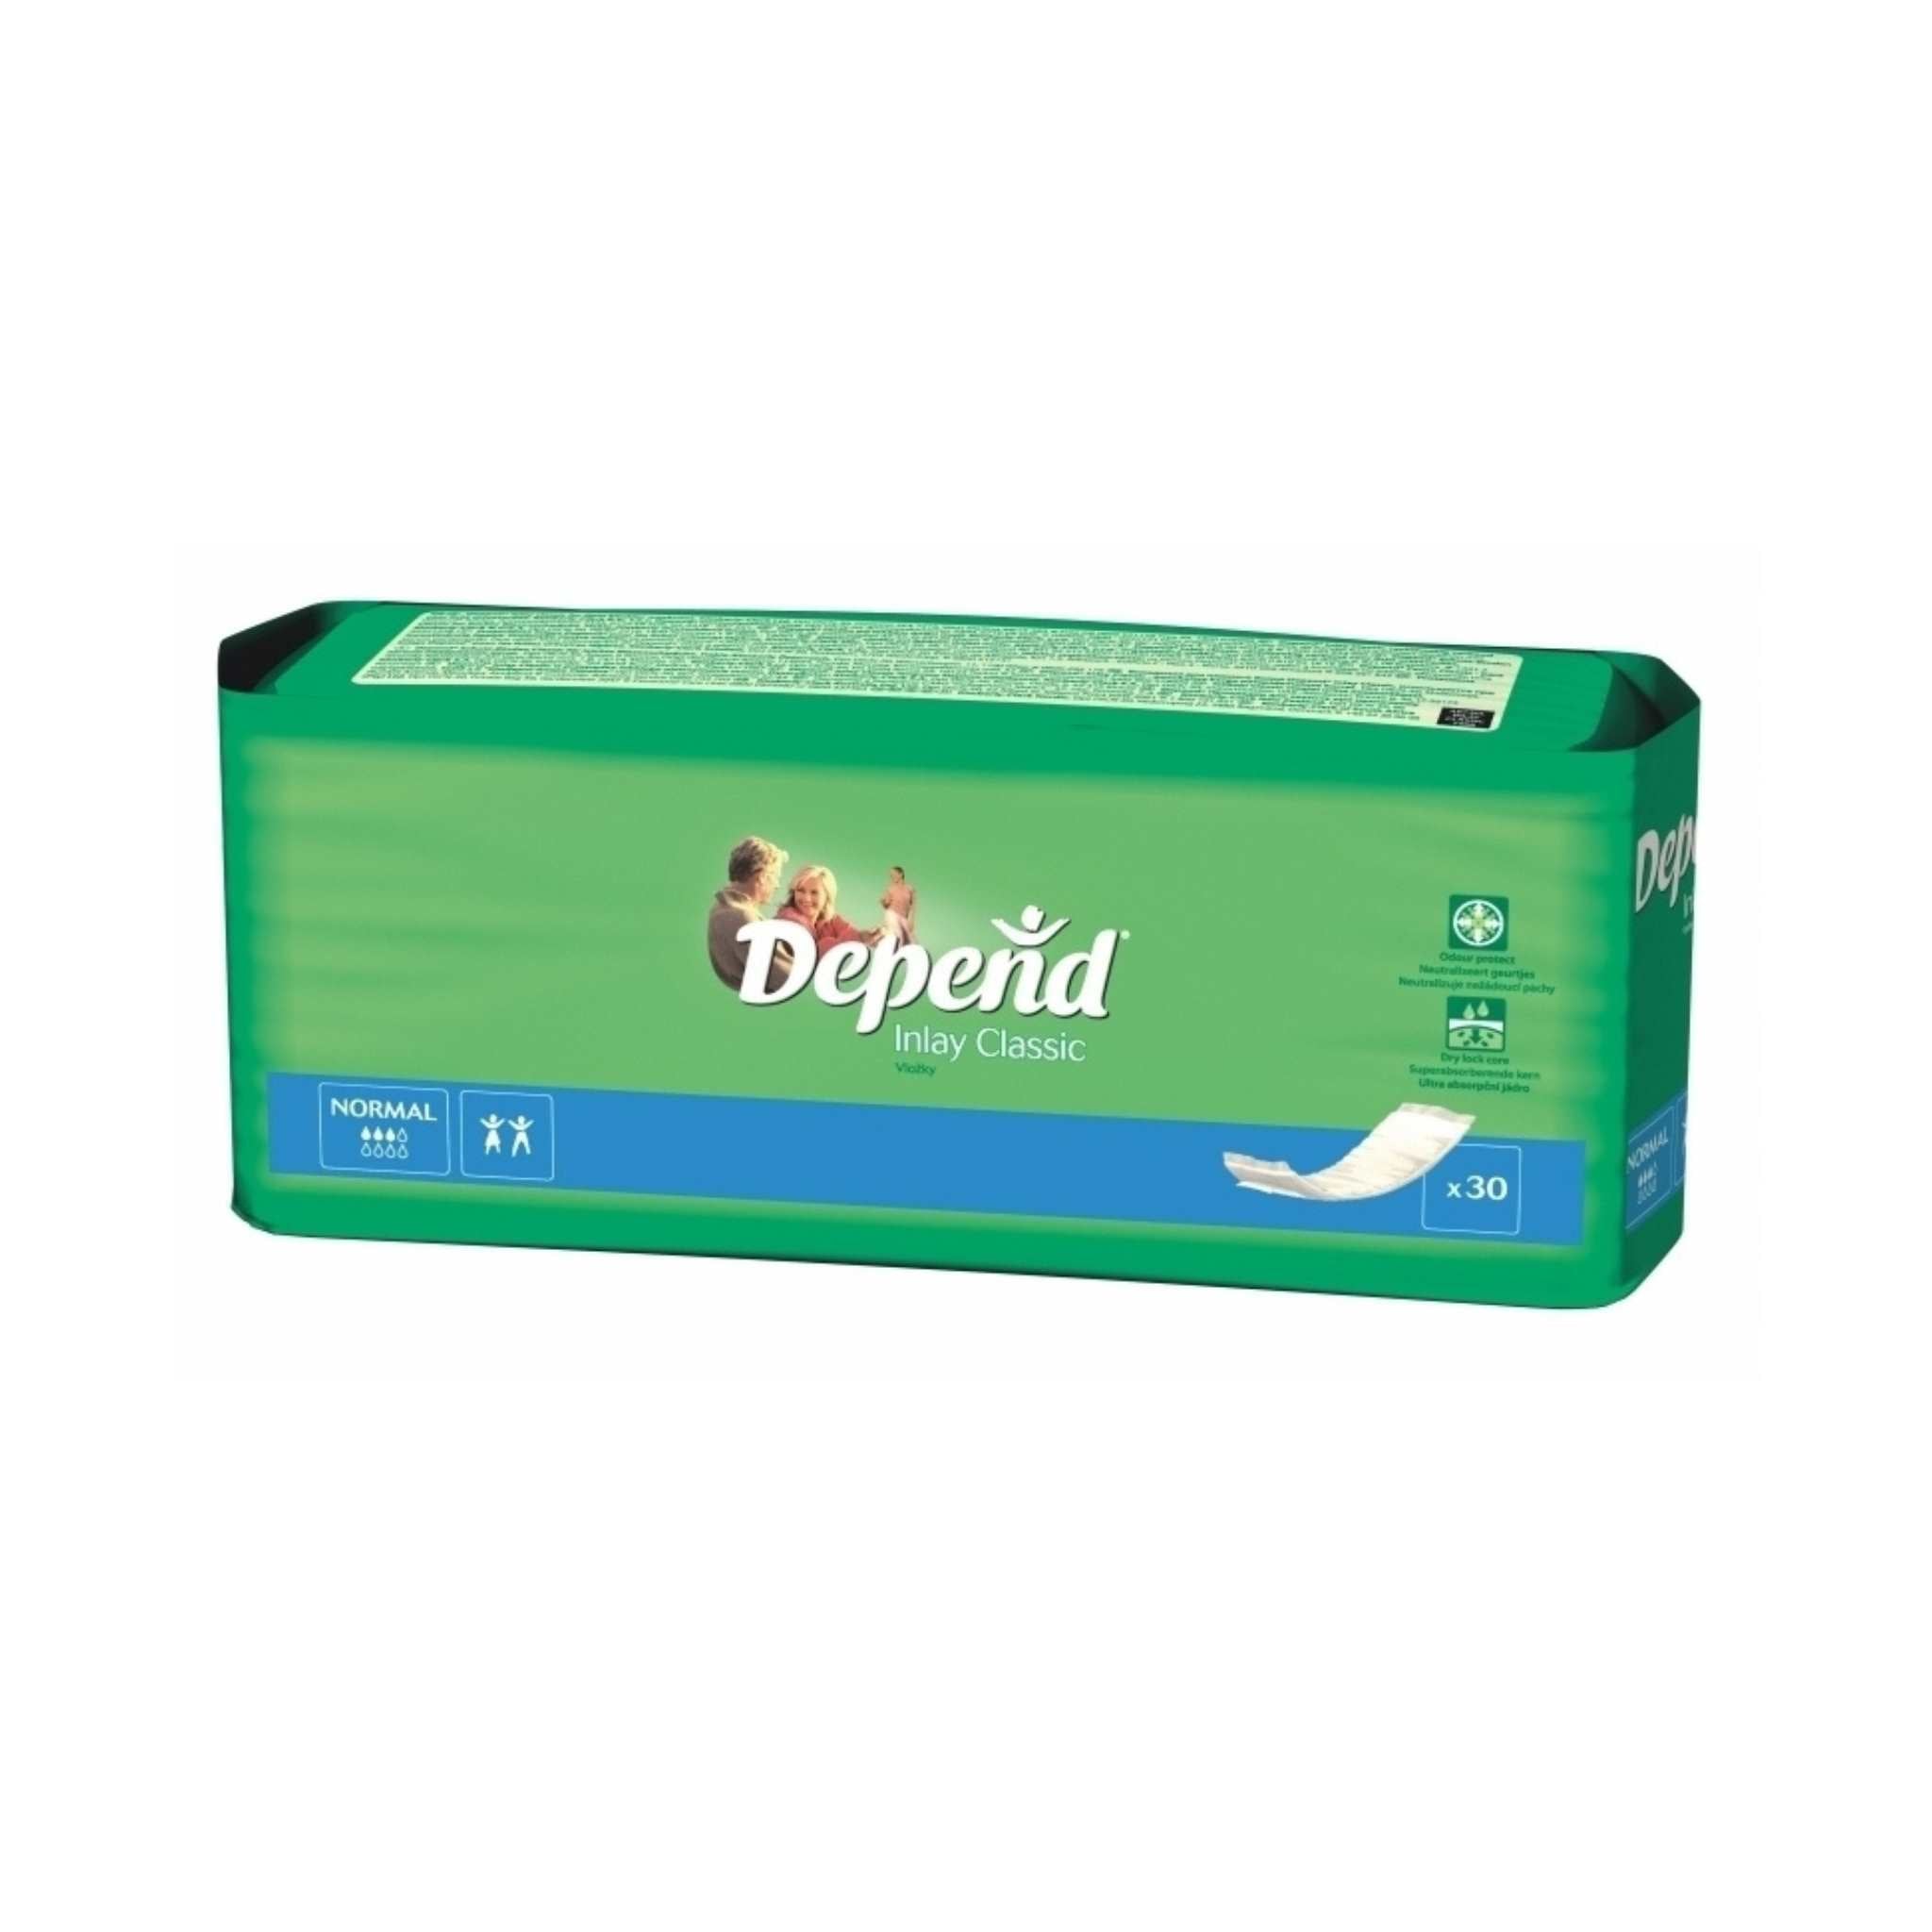 Depend Slip Inlay/Booster Pads - 30 Pack